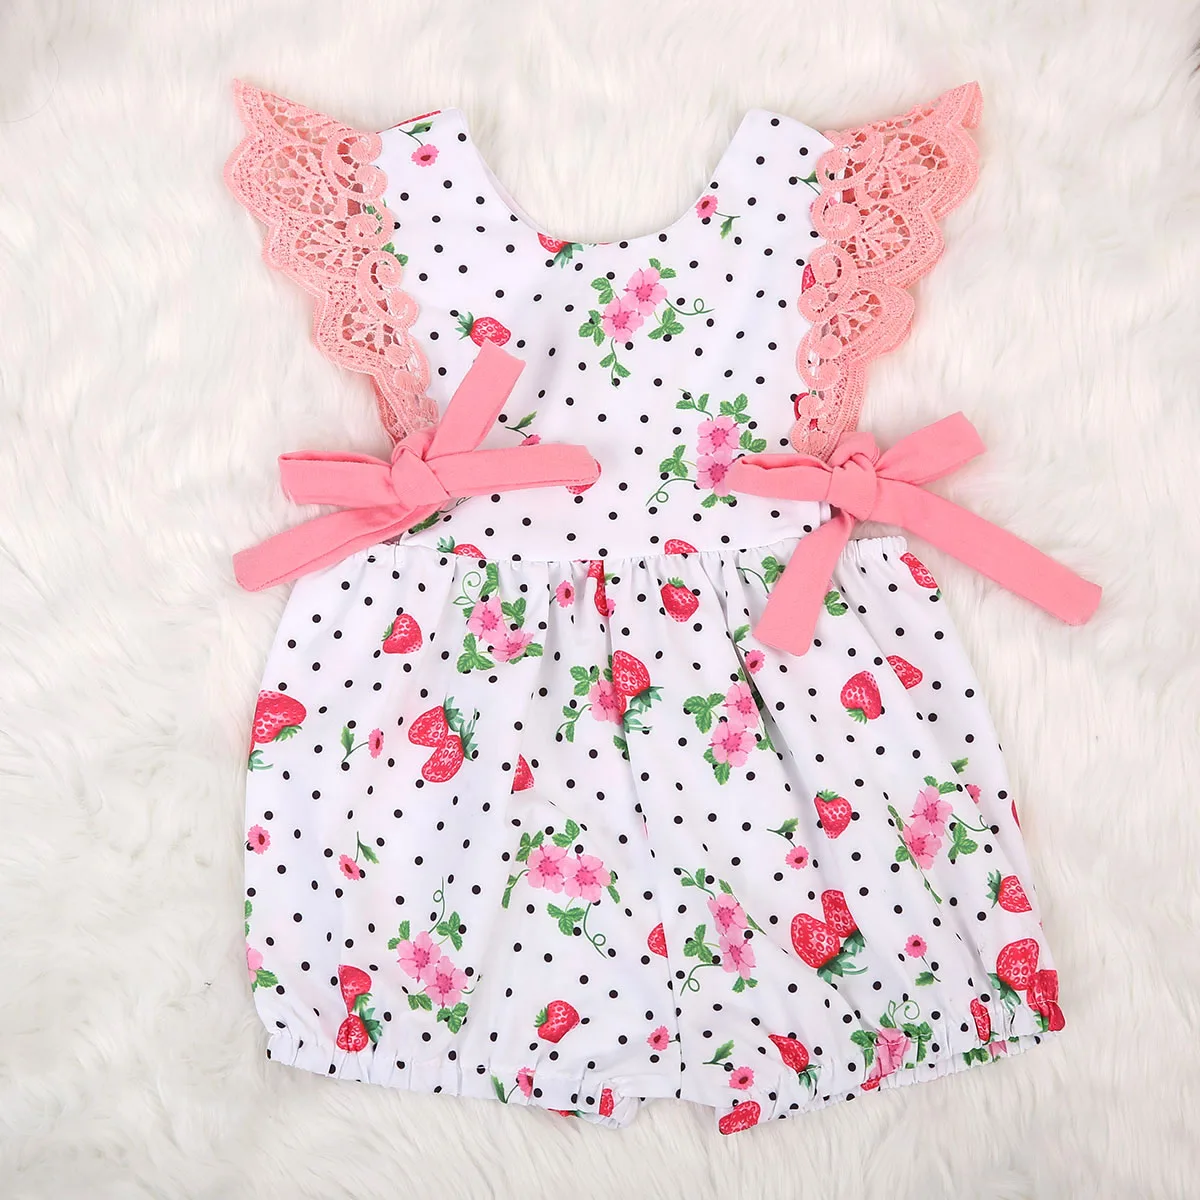 

2017 Summer Newborn Cute Baby Girls Strawberry Romper Sweet Bow tie Jumpsuit Outfit Sunsuit Clothes Sunsuit